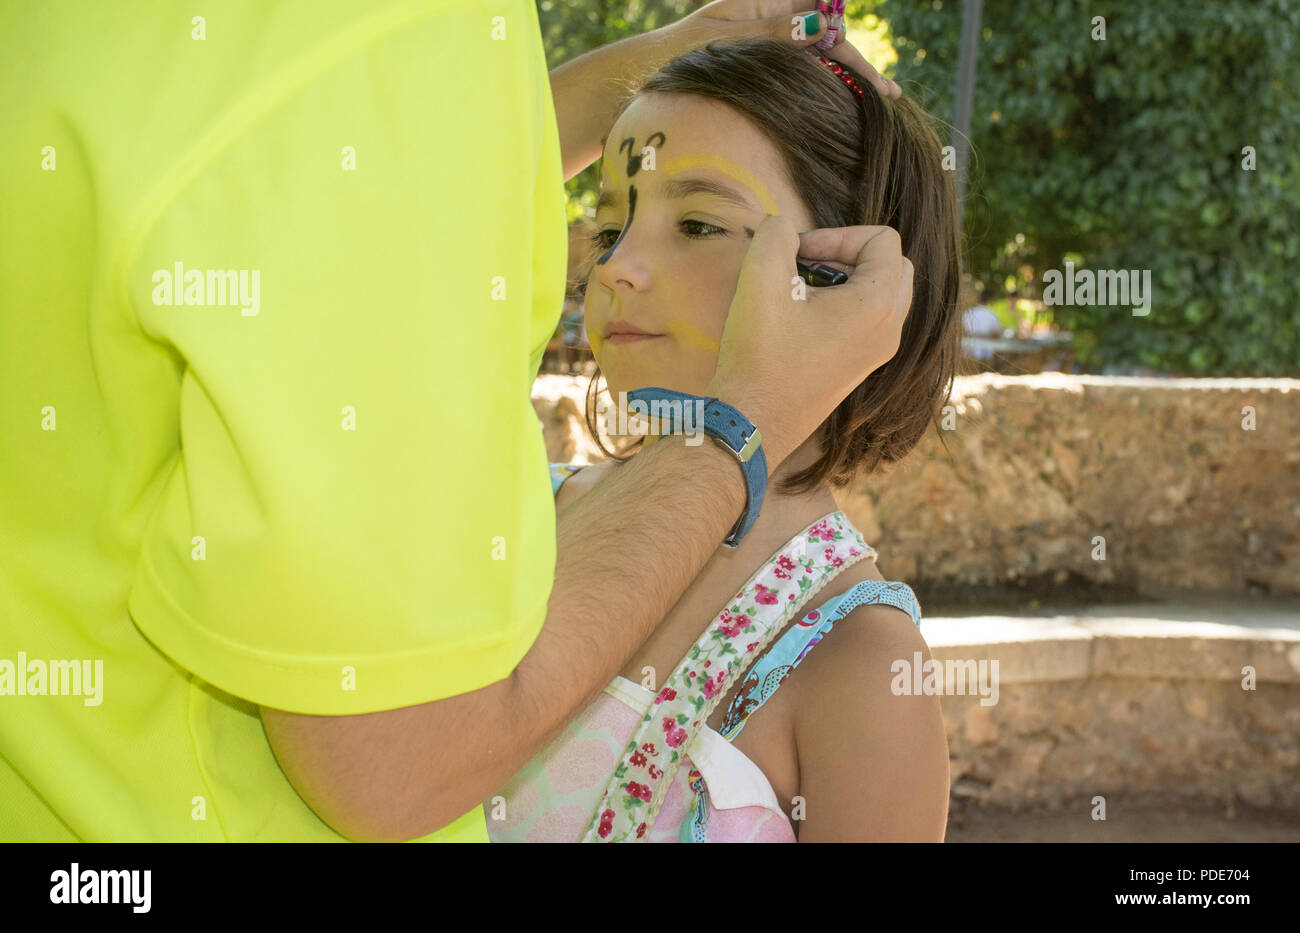 Little girl getting face painted during outdoors party. The make-up artist uses face paint crayons Stock Photo